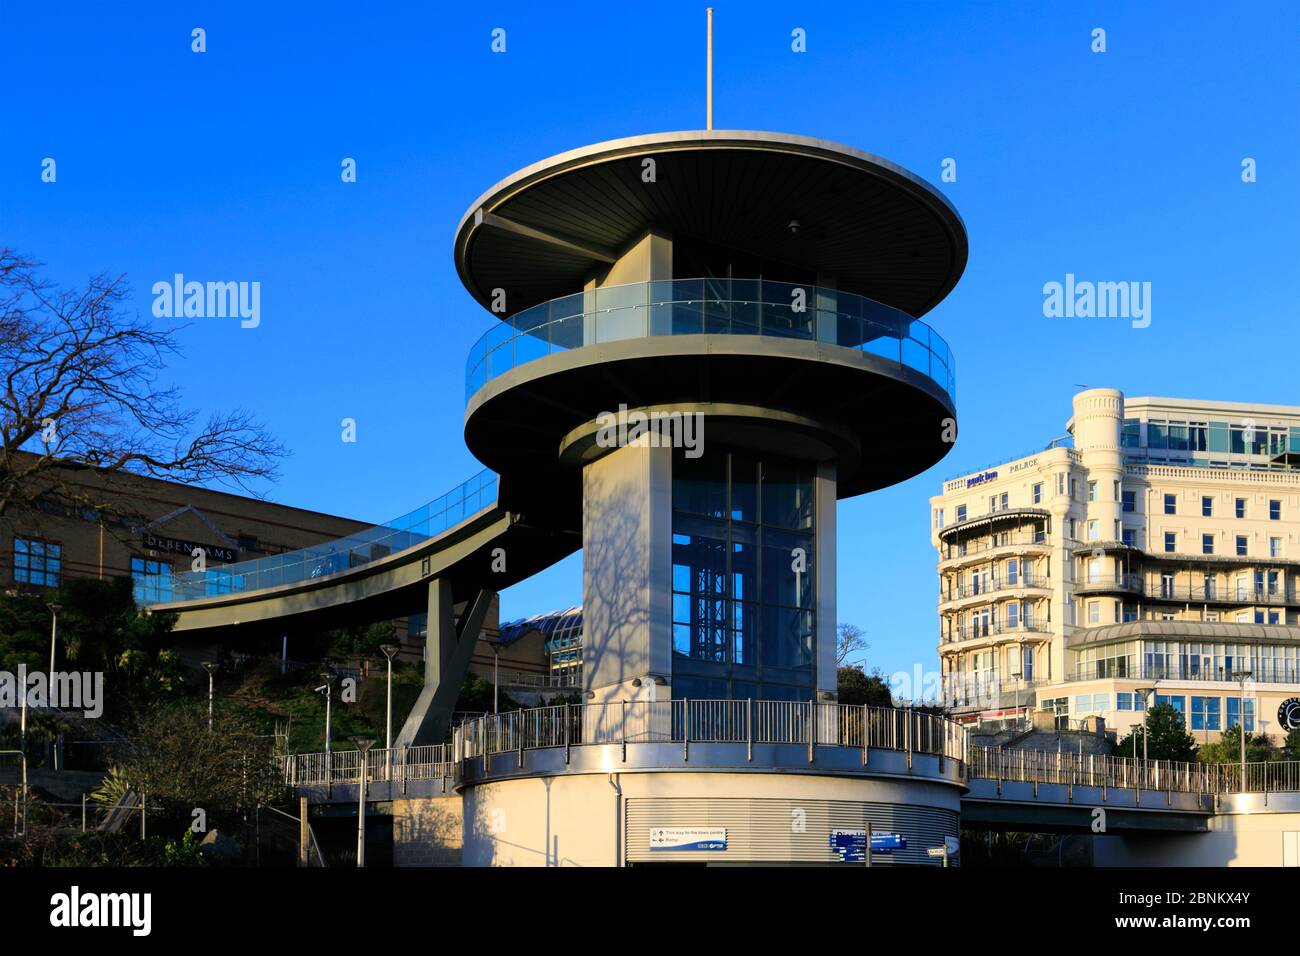 The Pier Hill Lift, Royal Terrace, Southend-on-Sea town, Thames Estuary, Essex, County, England, UK Stock Photo